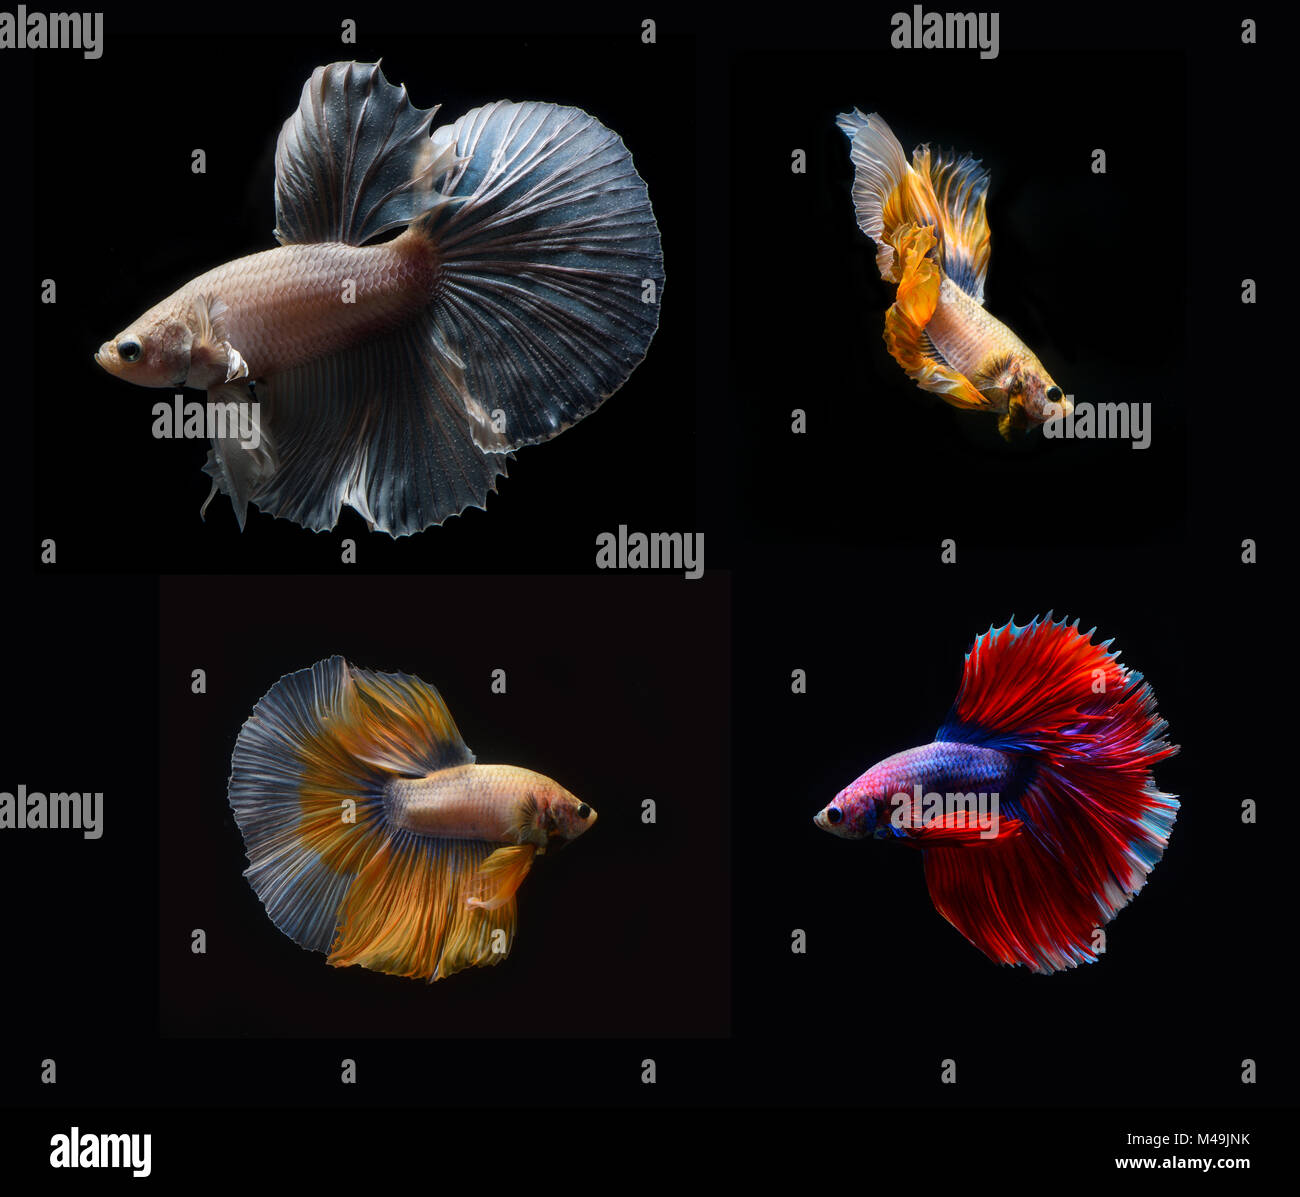 Fighting Fish on black background collection Stock Photo